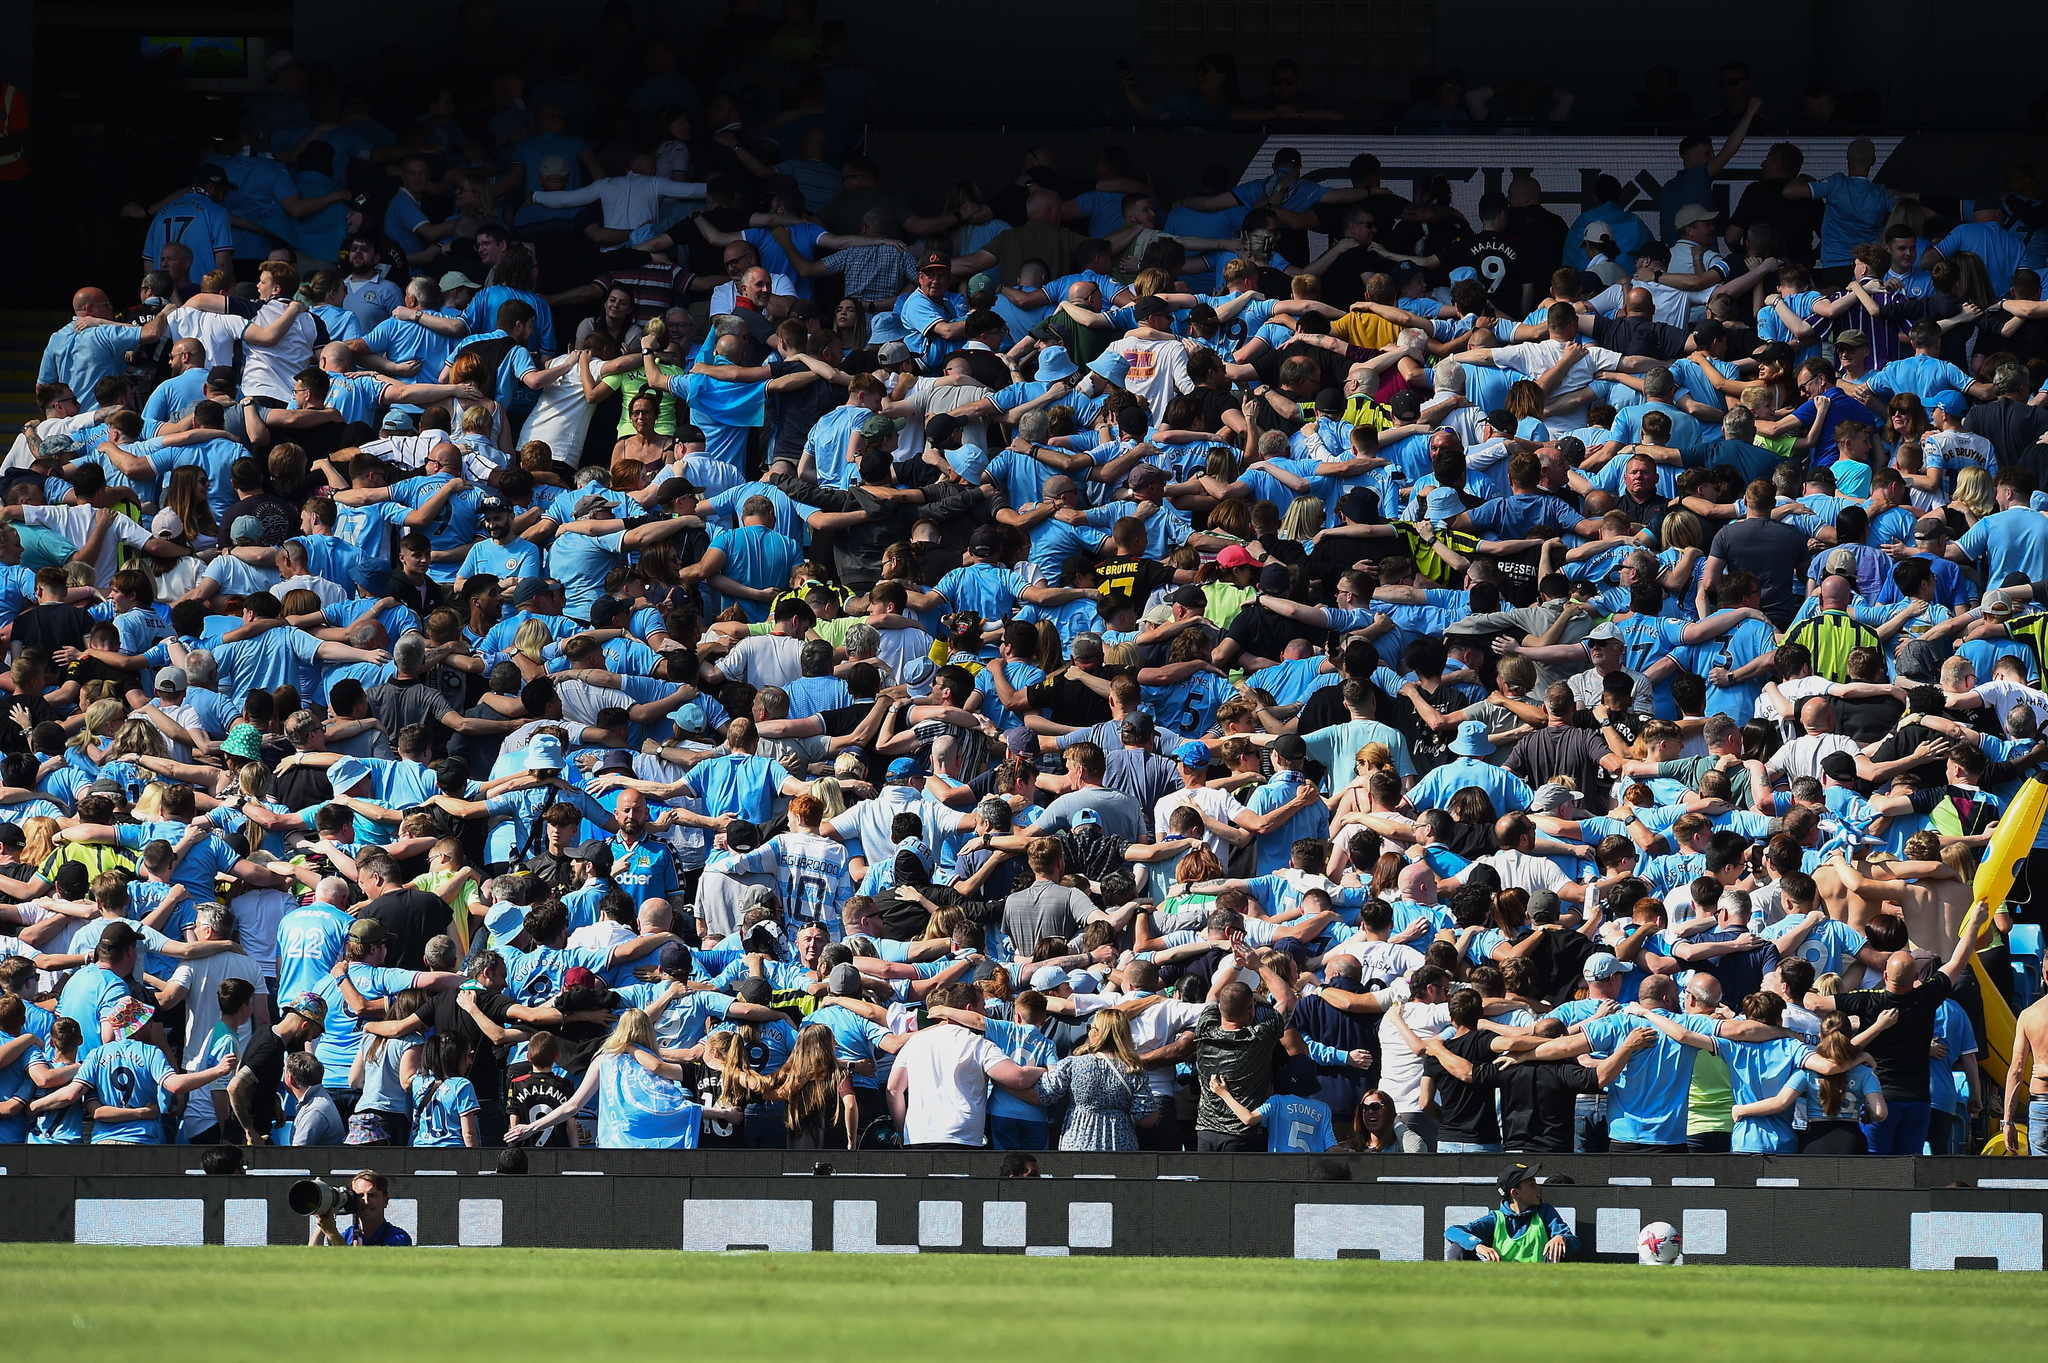  lt;HIT gt;Manchester lt;/HIT gt; (United Kingdom), 21/05/2023.-  lt;HIT gt;Manchester lt;/HIT gt; City's fans do the Poznan sporting celebration during the English Premier League soccer match between  lt;HIT gt;Manchester lt;/HIT gt; City and Chelsea at the Etihad in  lt;HIT gt;Manchester lt;/HIT gt;, Britain, 21 May 2023. (Reino Unido) EFE/EPA/Peter Powell EDITORIAL USE ONLY. No use with unauthorized audio, video, data, fixture lists, club/league logos or 'live' services. Online in-match use limited to 120 images, no video emulation. No use in betting, games or single club/league/player publications